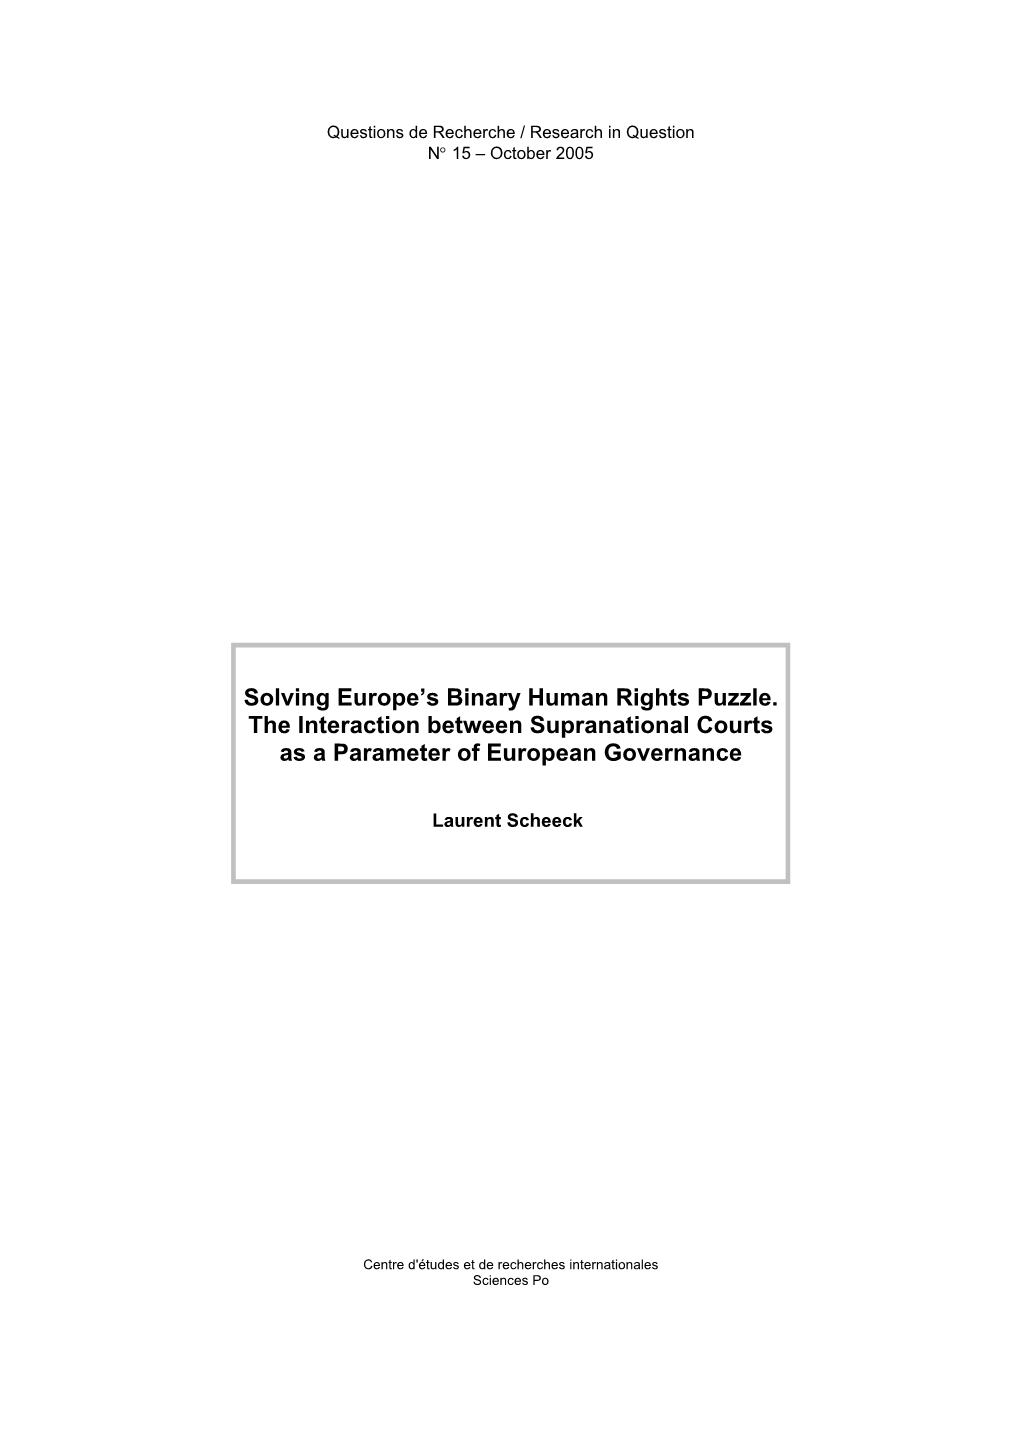 Solving Europe's Binary Human Rights Puzzle